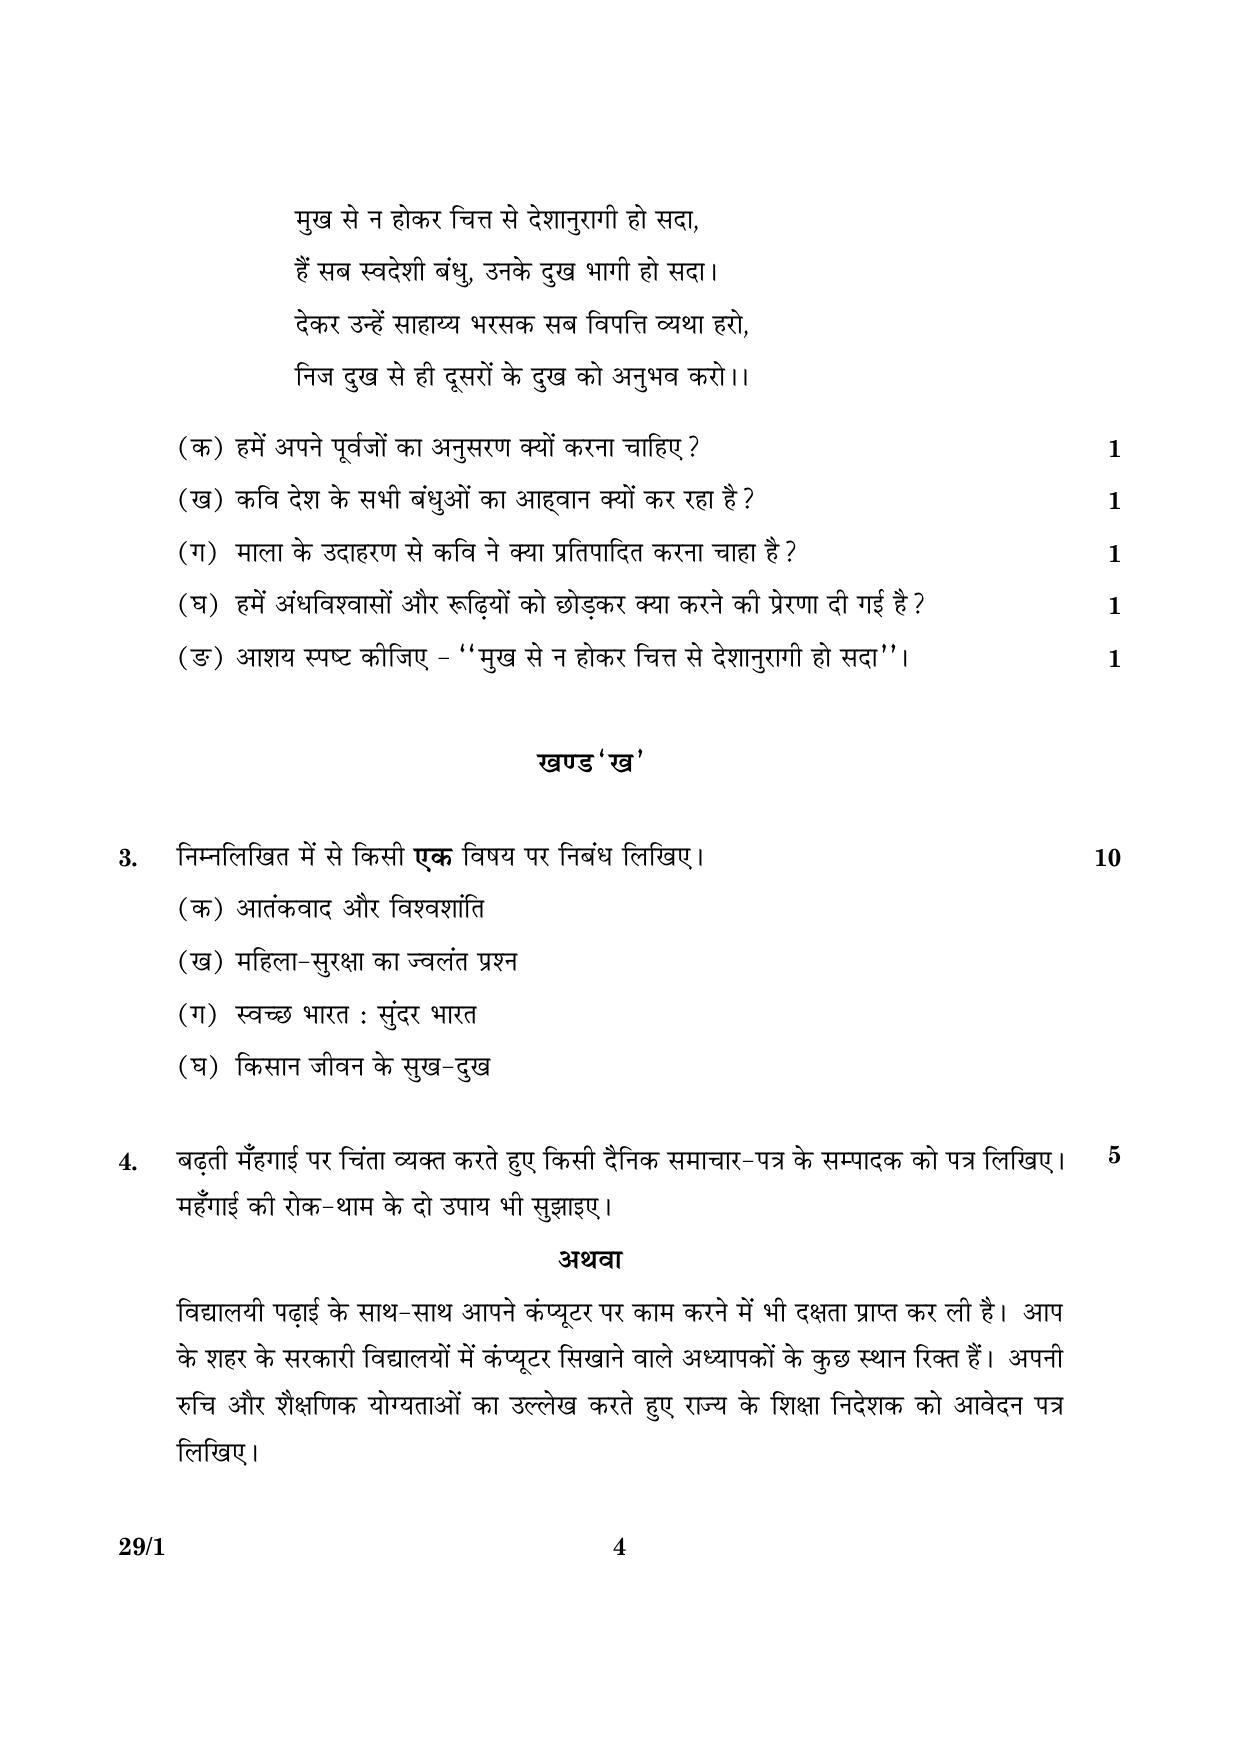 CBSE Class 12 029 Set 1 Hindi Elective 2016 Question Paper - Page 4